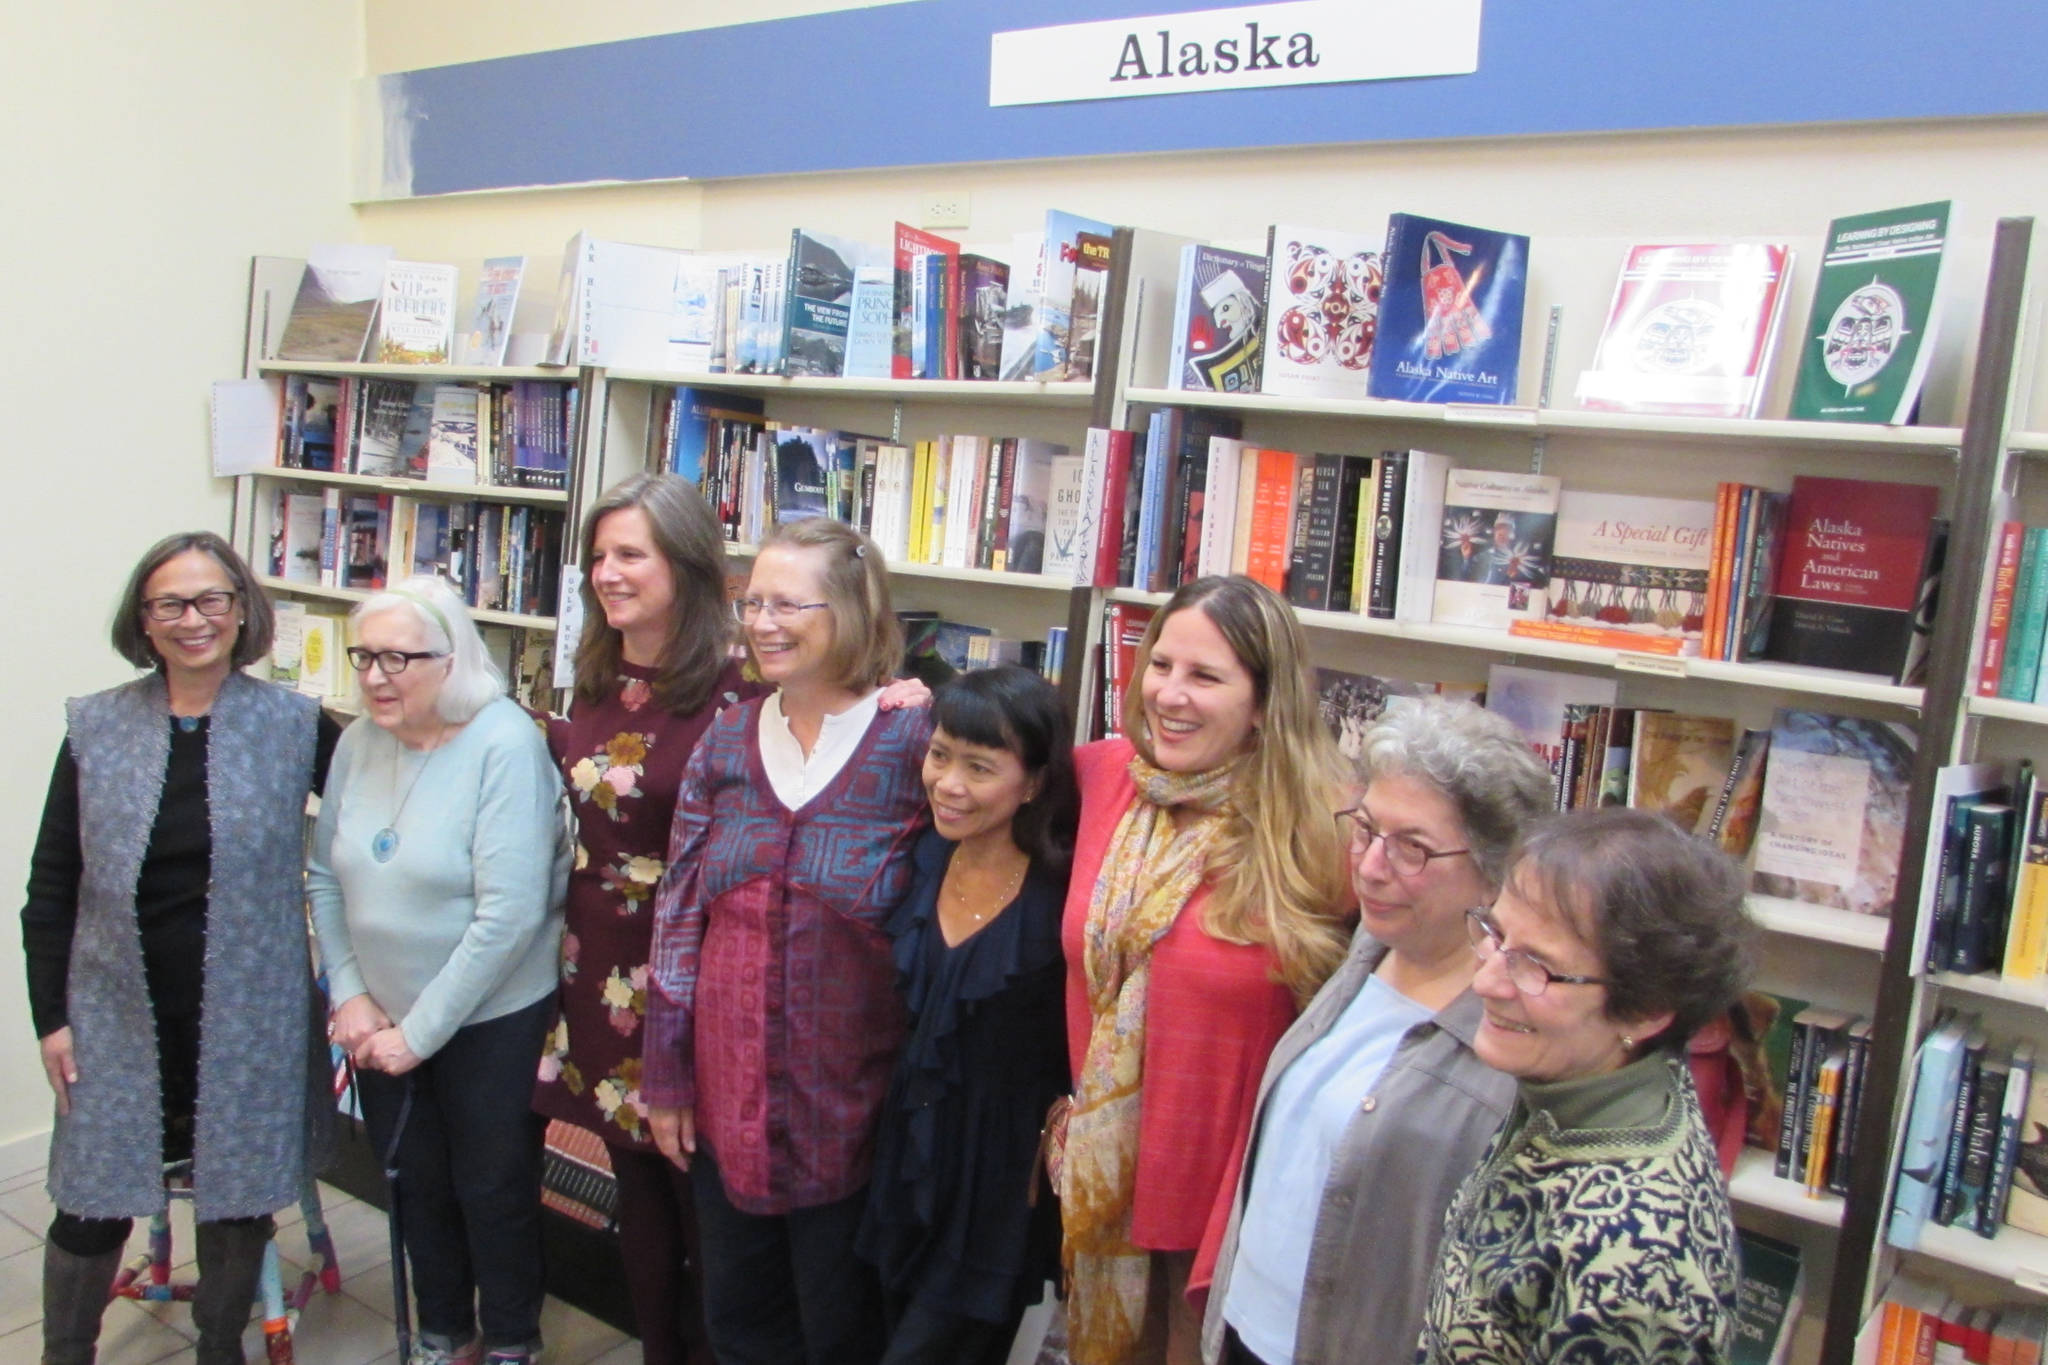 Alaska Women Speak President Carmen Davis stands with writers Mary Lou Spartz, Katie Bausler, Kate Boesser, Miriam Wagoner, Amy Pinney, Margo Waring and Dianne DeSloover at a poetry and prose reading at Hearthside Books in Nugget Mall. (Ben Hohenstatt | Capital City Weekly)